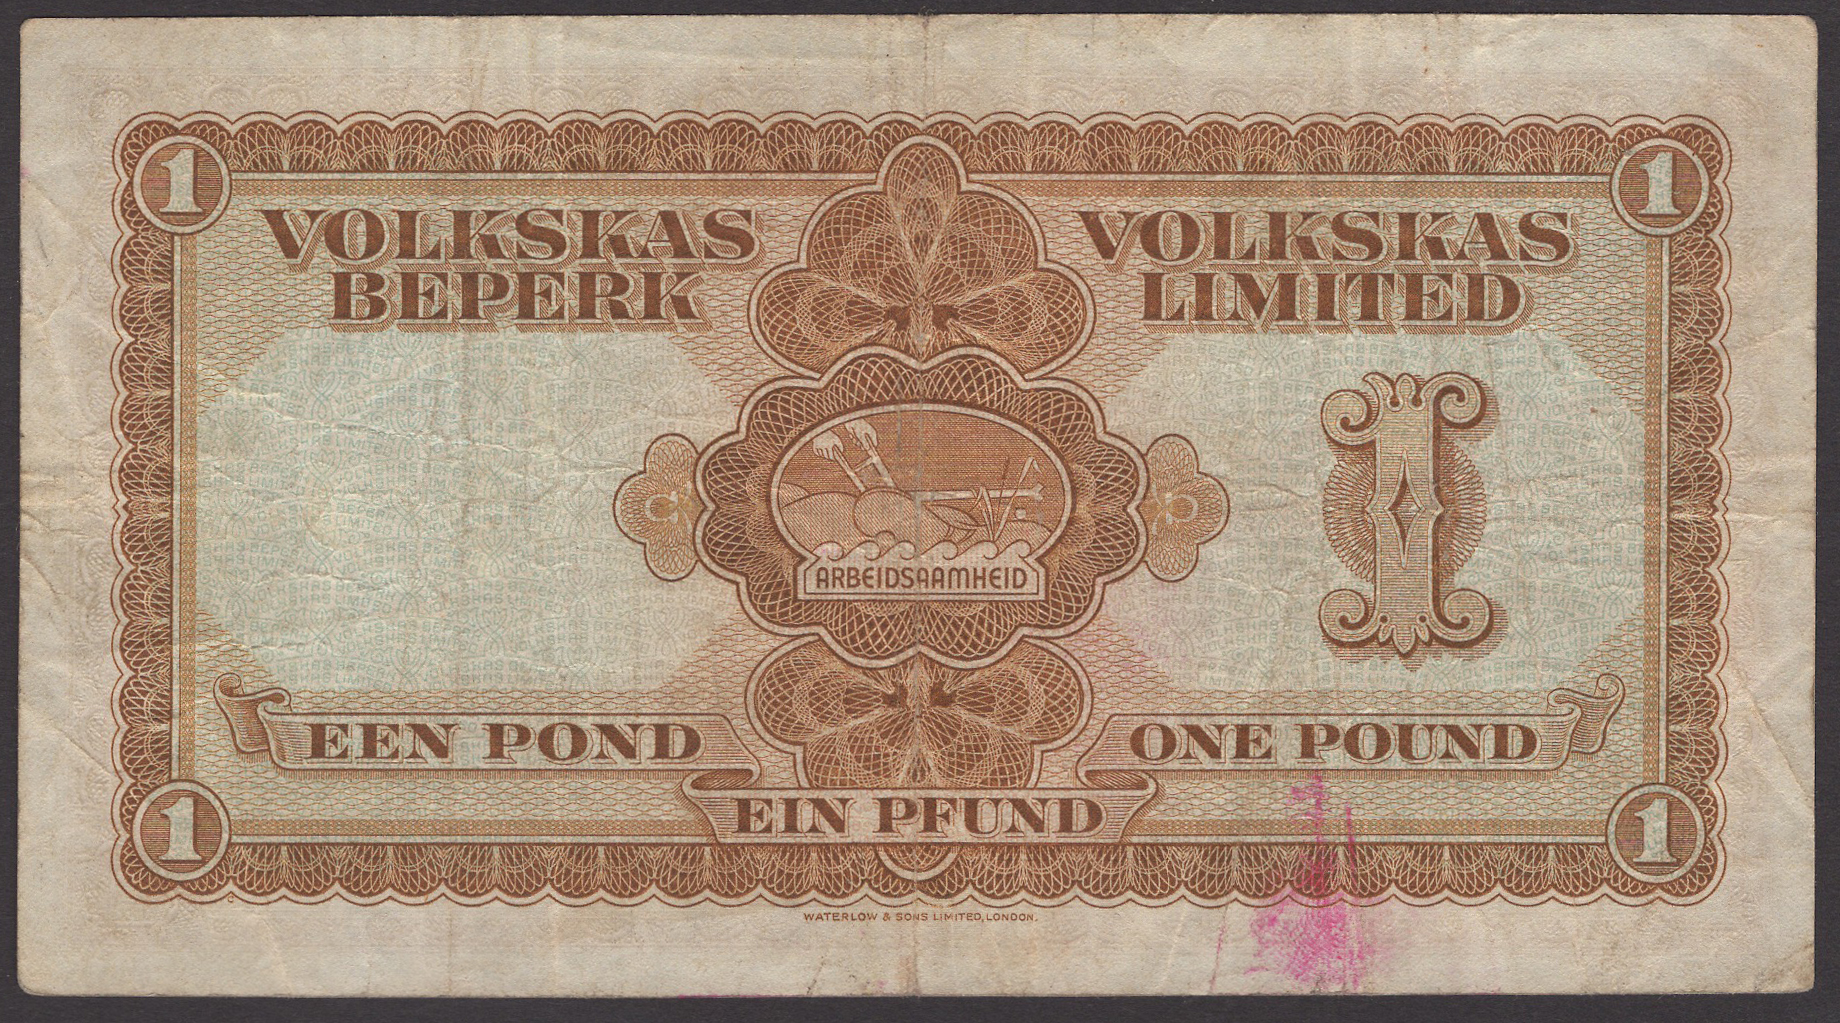 Volksas Bank, Southwest Africa, Â£1, 11 May 1950, serial number A/1 10215, Wolfaardt and... - Image 2 of 2